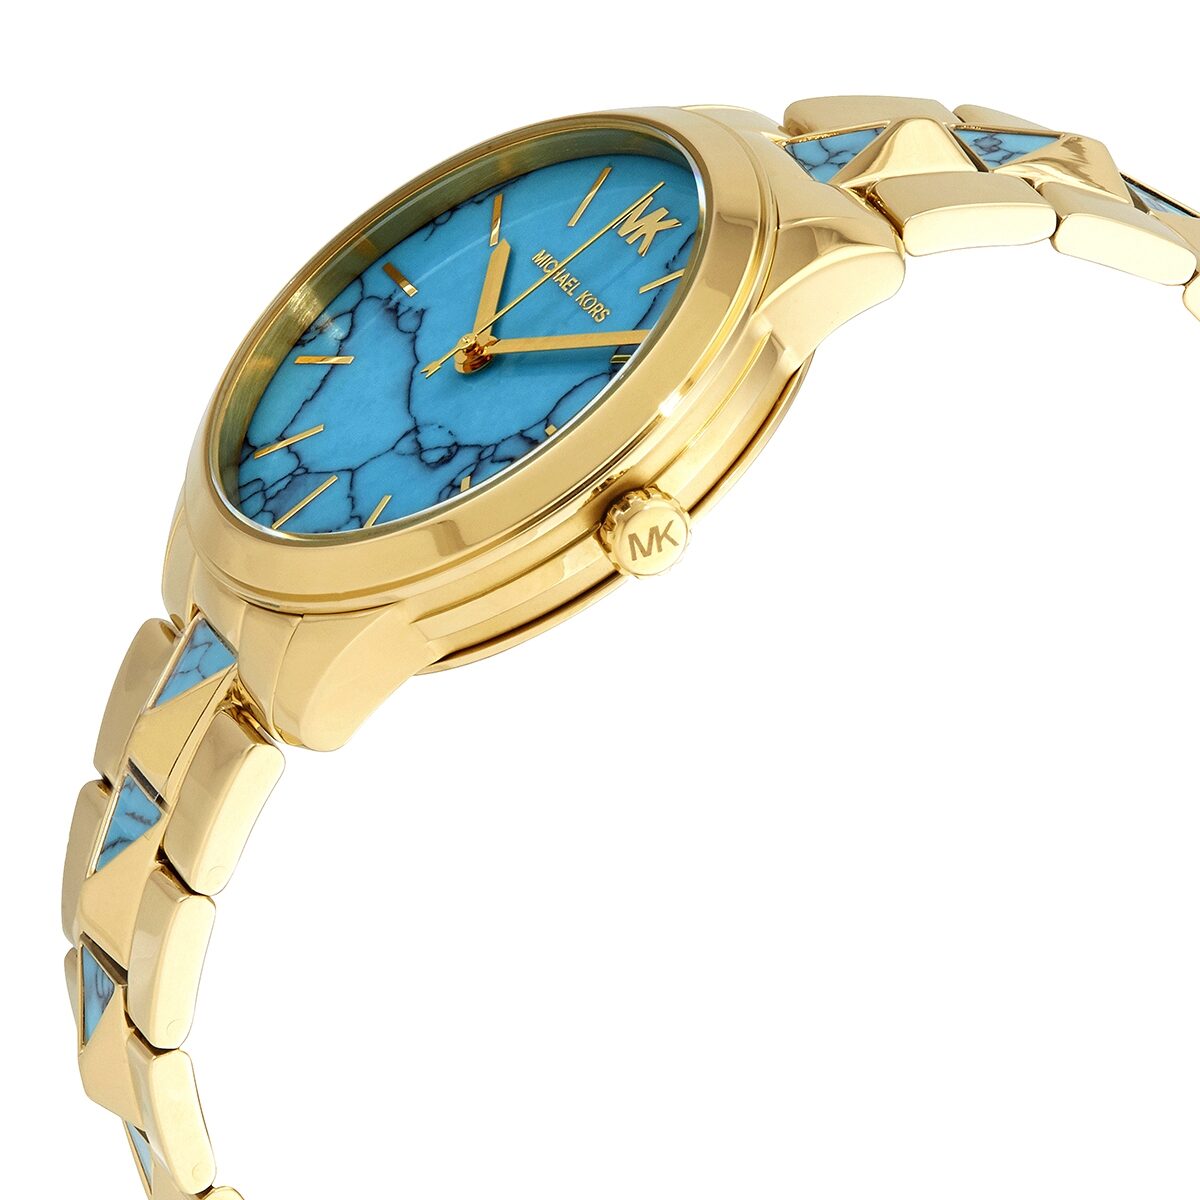 Michael Kors MK5815 Gold Tone Turquoise Blue Mid Size Dial Womens Watch